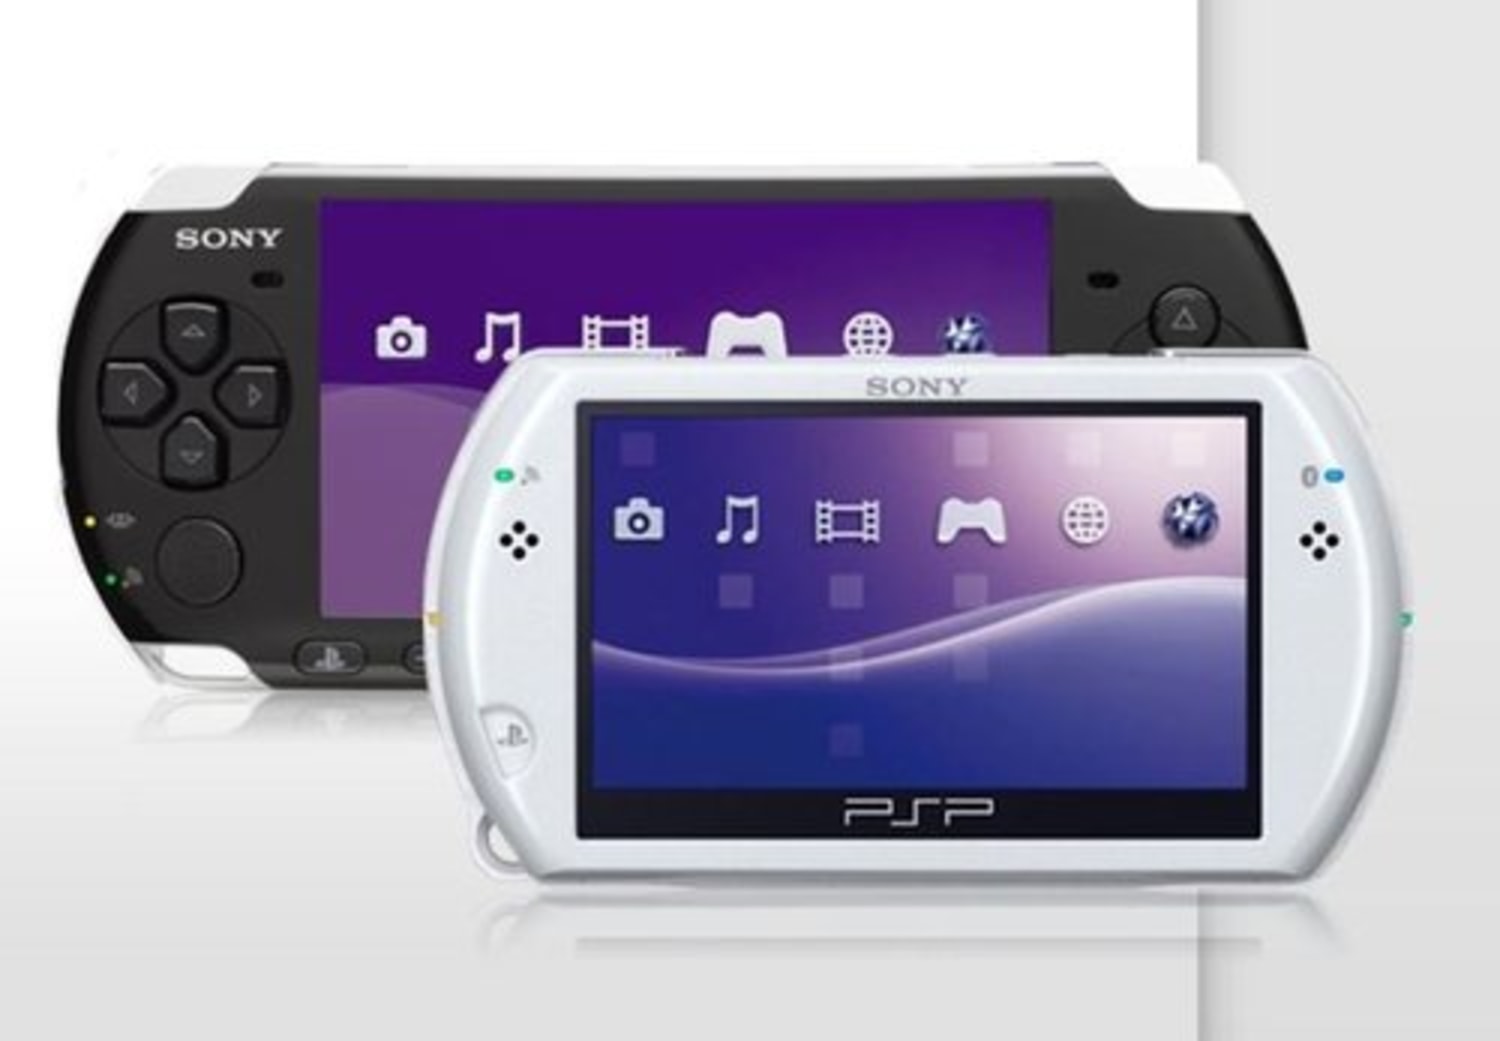 What's your favorite handheld console and why is it the PSP Go